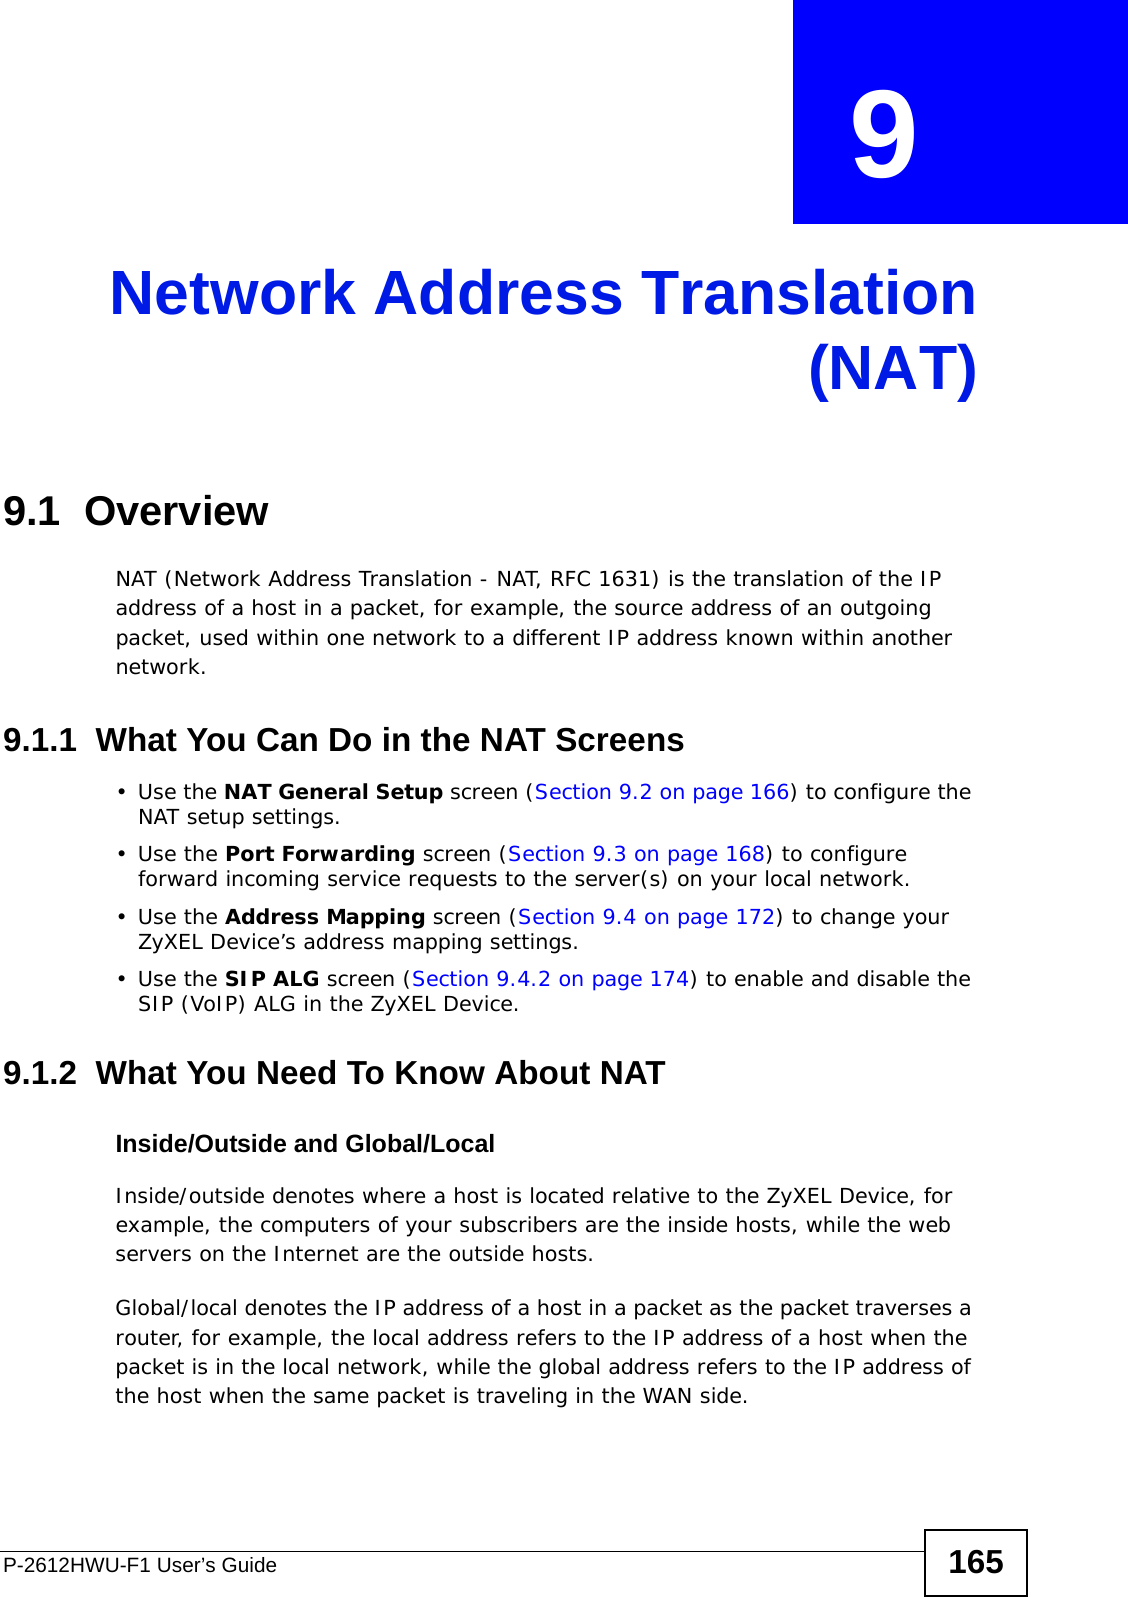 P-2612HWU-F1 User’s Guide 165CHAPTER  9 Network Address Translation(NAT)9.1  Overview NAT (Network Address Translation - NAT, RFC 1631) is the translation of the IP address of a host in a packet, for example, the source address of an outgoing packet, used within one network to a different IP address known within another network.9.1.1  What You Can Do in the NAT Screens•Use the NAT General Setup screen (Section 9.2 on page 166) to configure the NAT setup settings.•Use the Port Forwarding screen (Section 9.3 on page 168) to configure forward incoming service requests to the server(s) on your local network. •Use the Address Mapping screen (Section 9.4 on page 172) to change your ZyXEL Device’s address mapping settings.•Use the SIP ALG screen (Section 9.4.2 on page 174) to enable and disable the SIP (VoIP) ALG in the ZyXEL Device.9.1.2  What You Need To Know About NATInside/Outside and Global/LocalInside/outside denotes where a host is located relative to the ZyXEL Device, for example, the computers of your subscribers are the inside hosts, while the web servers on the Internet are the outside hosts. Global/local denotes the IP address of a host in a packet as the packet traverses a router, for example, the local address refers to the IP address of a host when the packet is in the local network, while the global address refers to the IP address of the host when the same packet is traveling in the WAN side. 